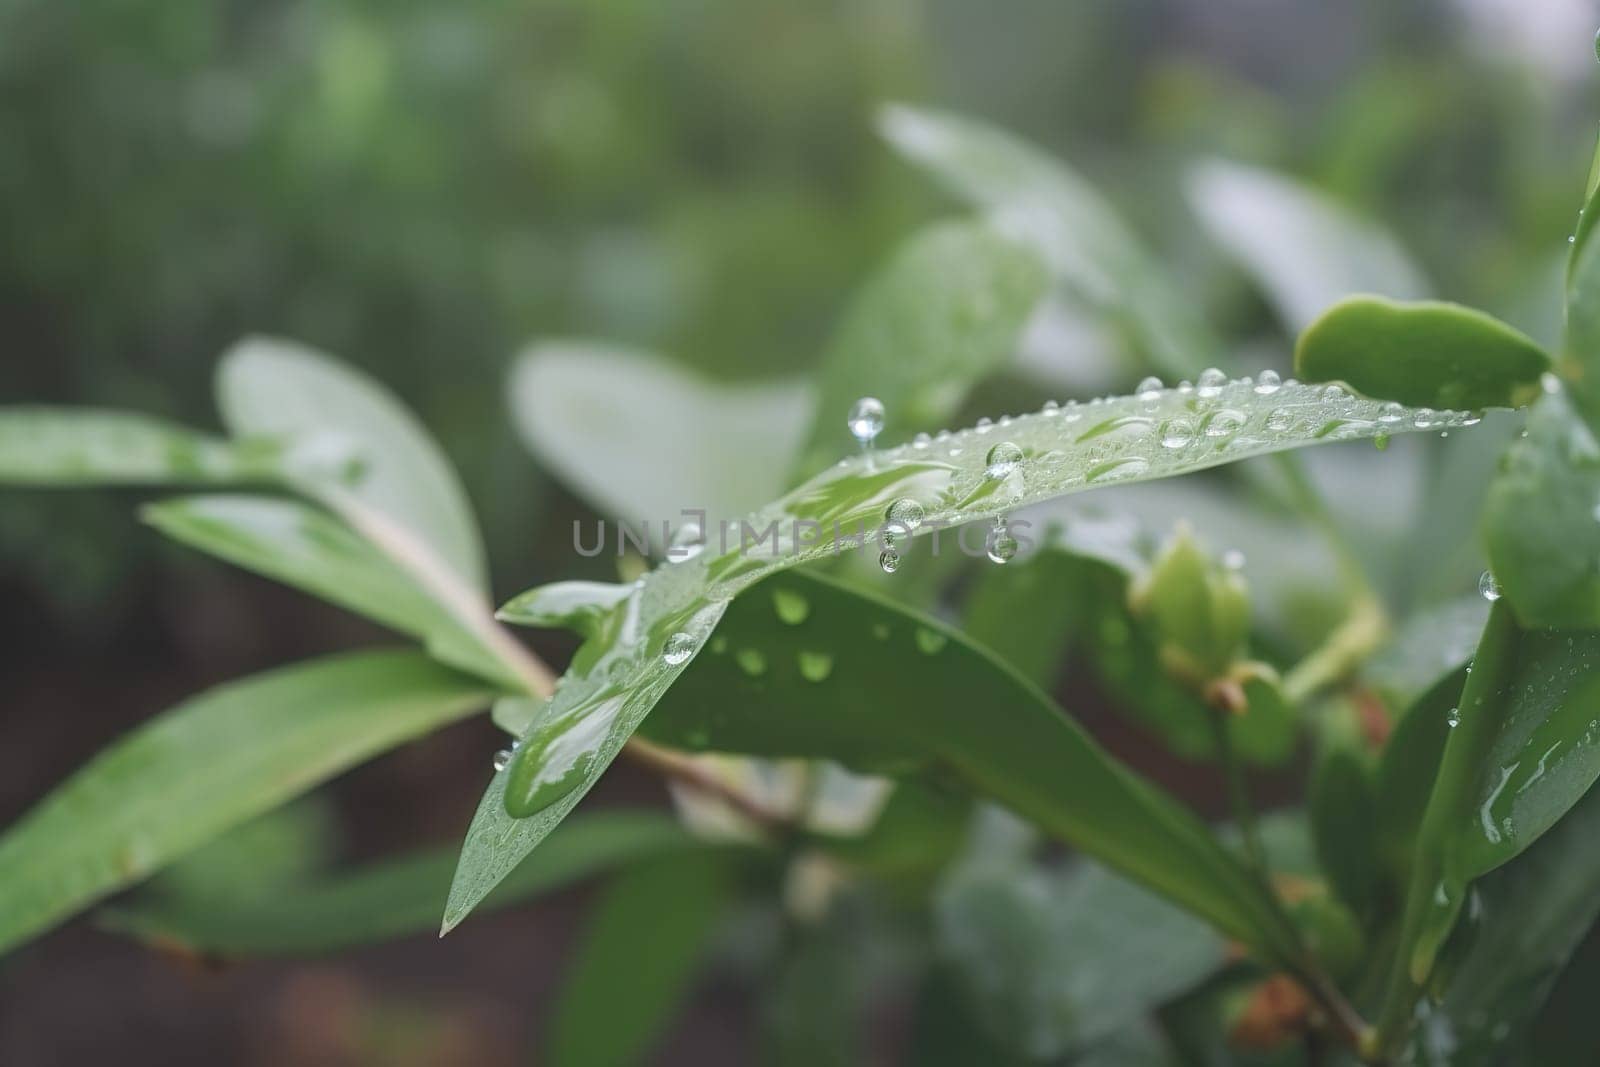 Beautiful plants with dew drops in nature on rainy morning in garden, selective focus. Image in green tones. Spring summer natural background by FokasuArt